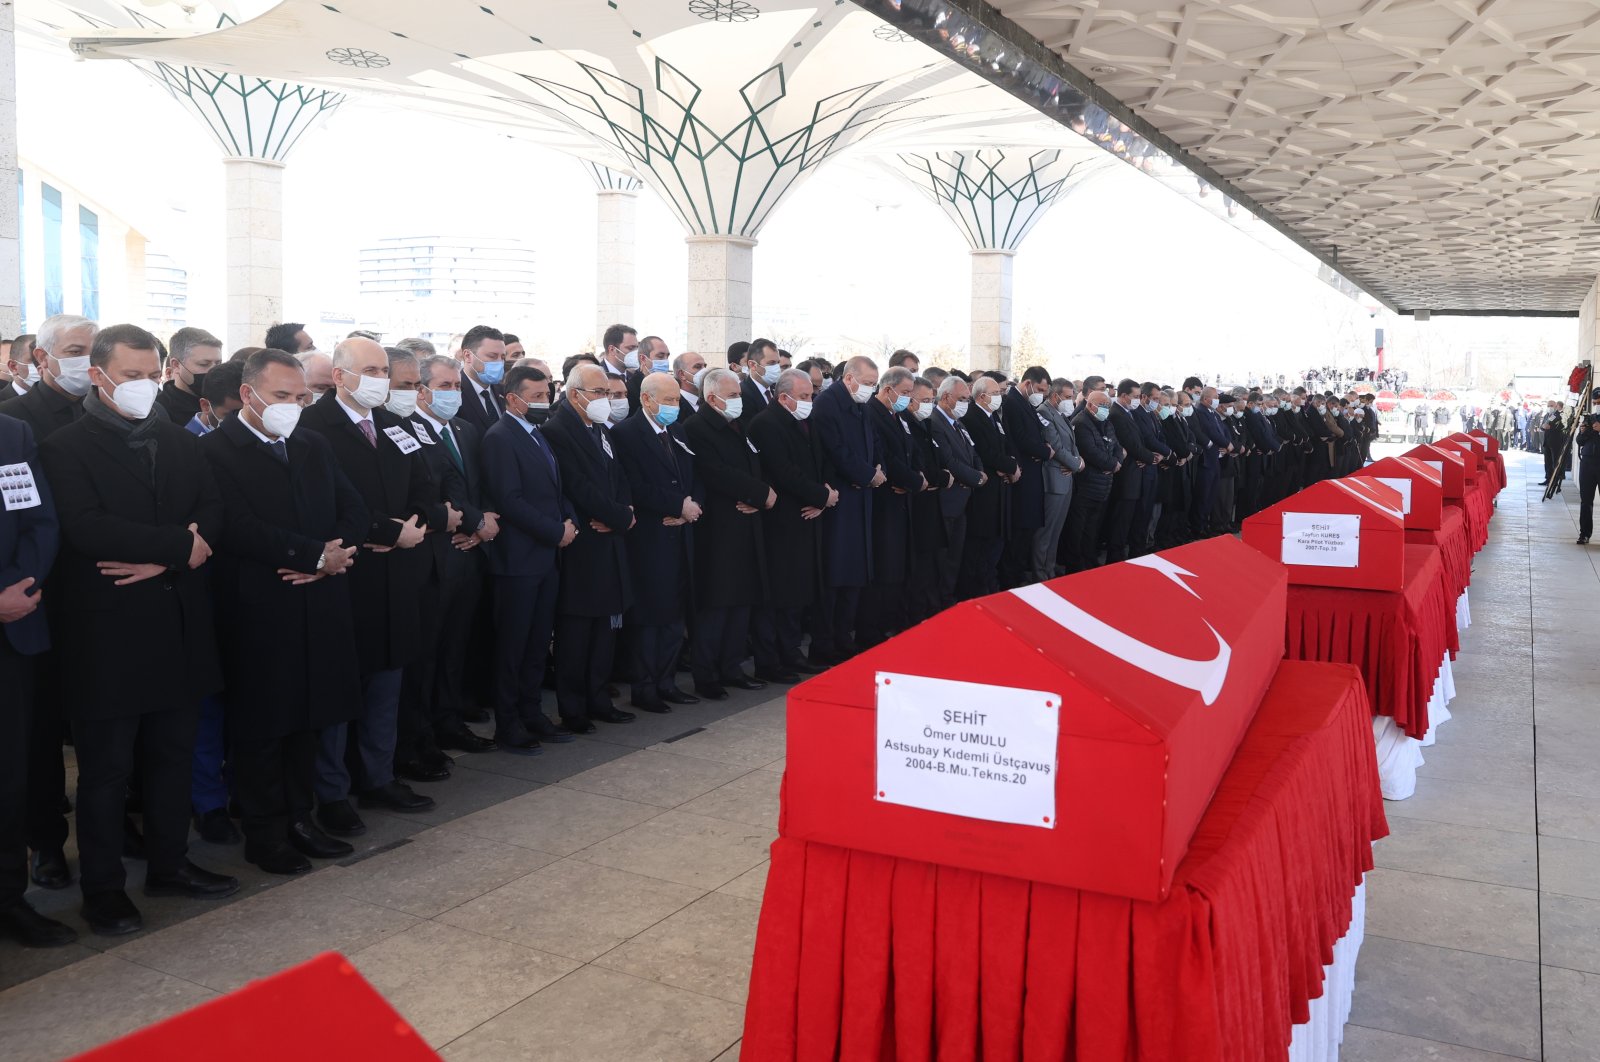 President Recep Tayyip Erdoğan and other dignitaries attend funeral prayers for the victims in the capital Ankara, Turkey, March 5, 2021. (AA PHOTO)